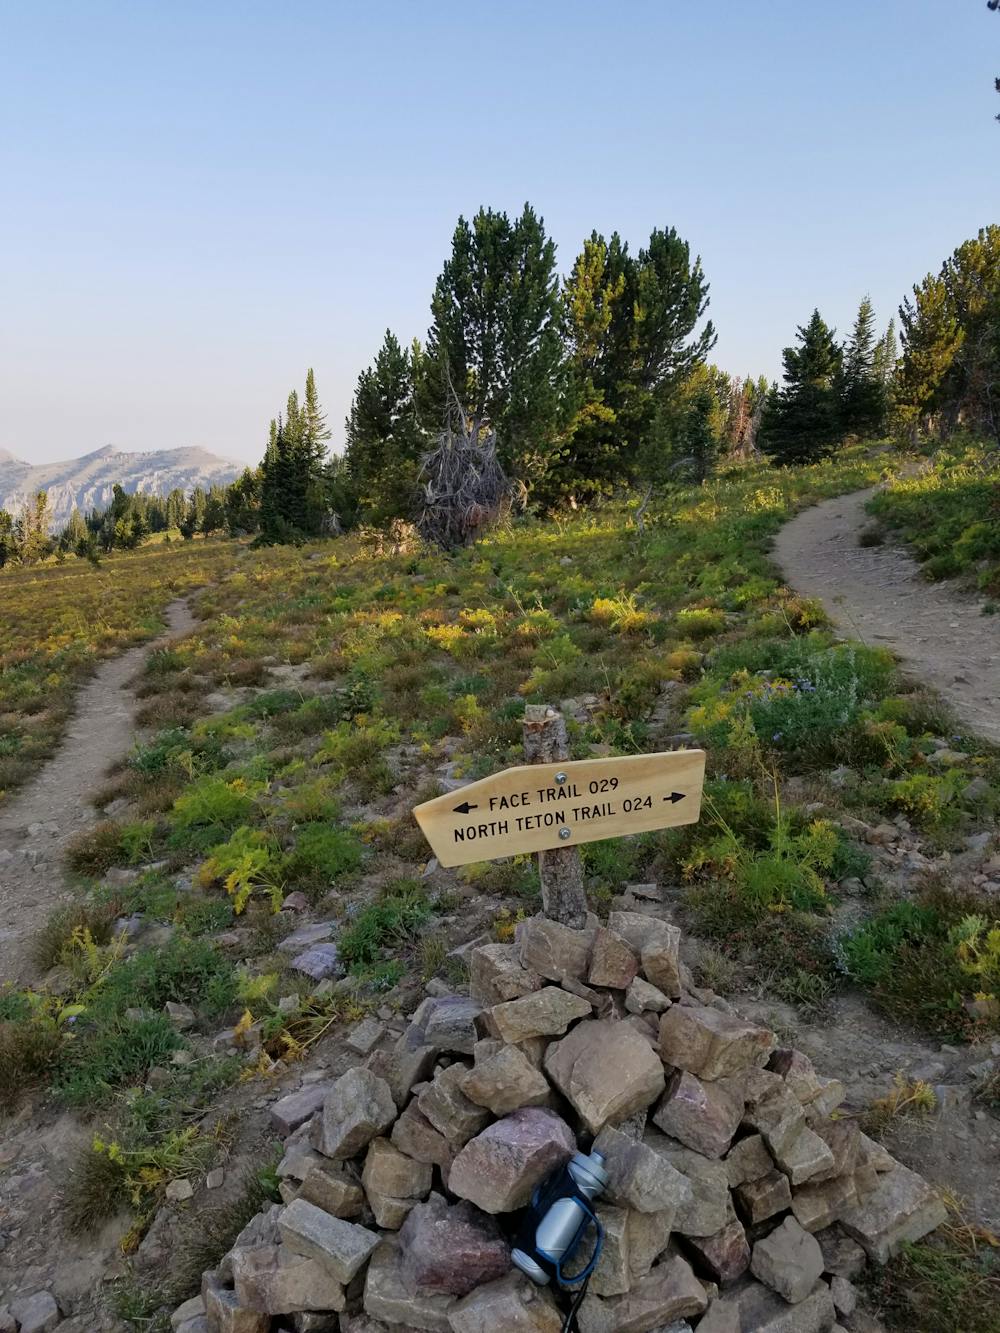 North Teton Trail/Face Trail Intersection